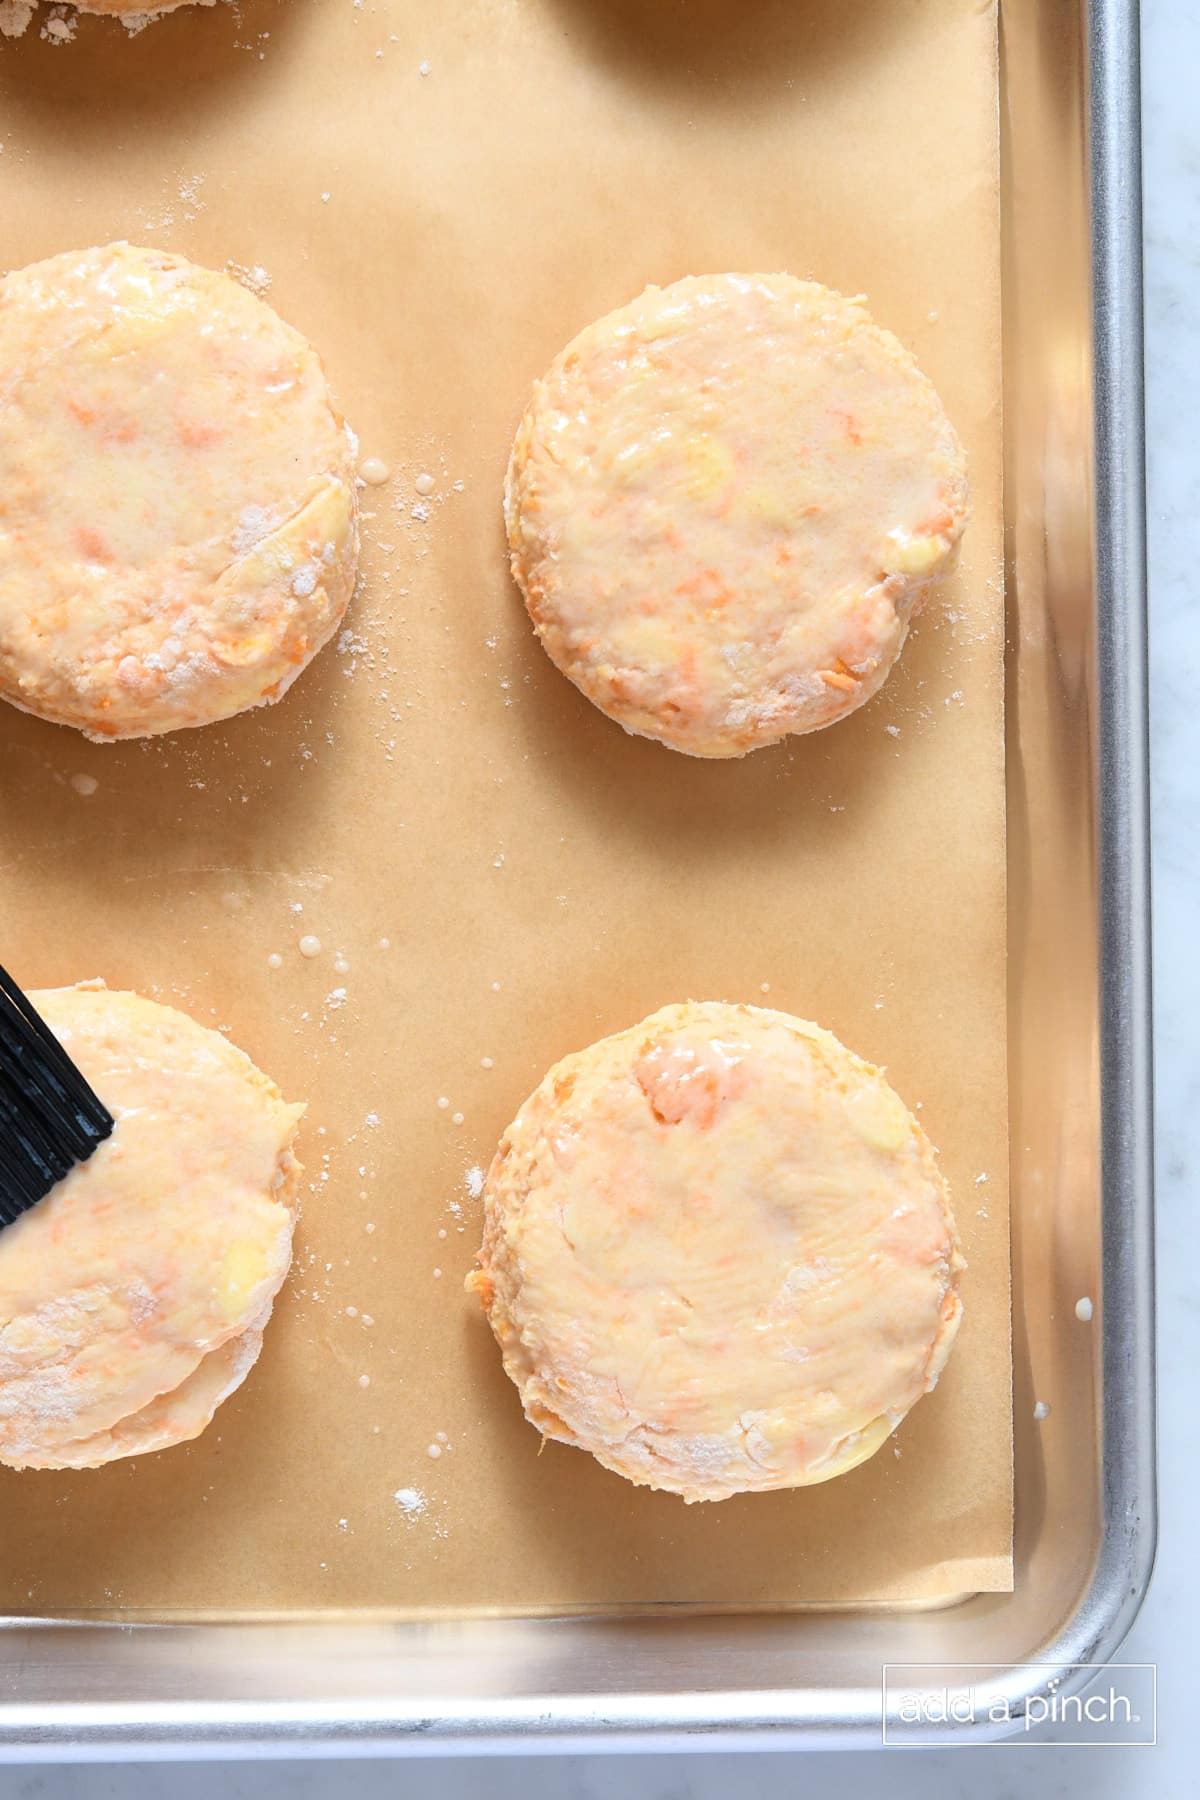 Brushing butter on sweet potato biscuits on a parchment lined baking sheet.